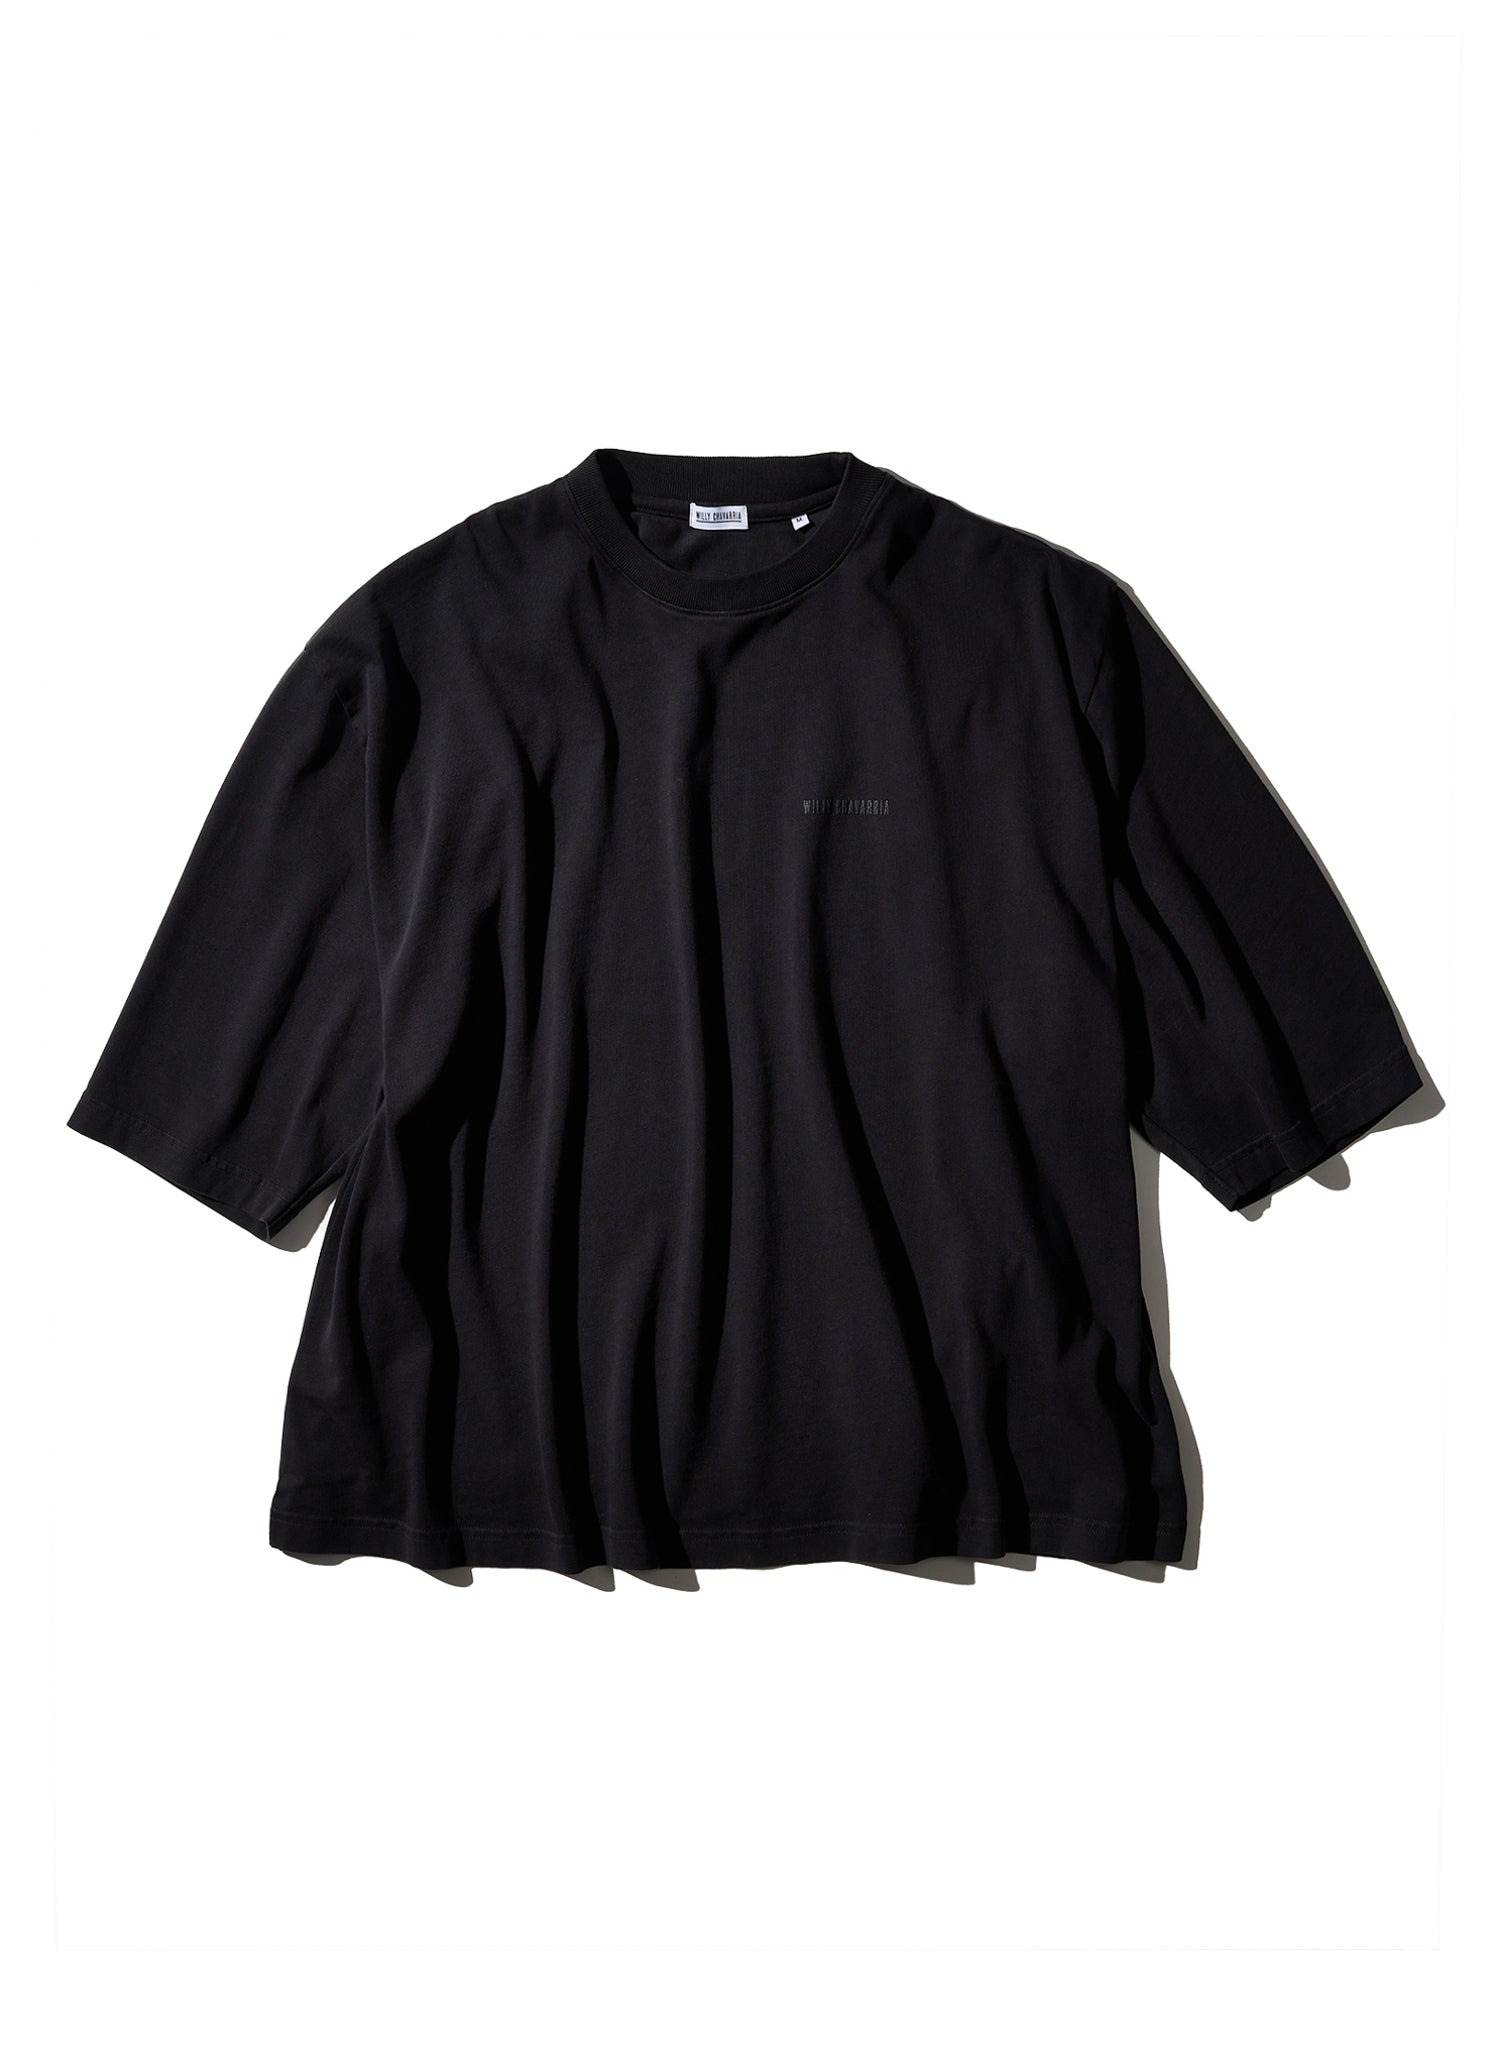 WILLY CHAVARRIA / SS BUFFALO T SOLID BLACK